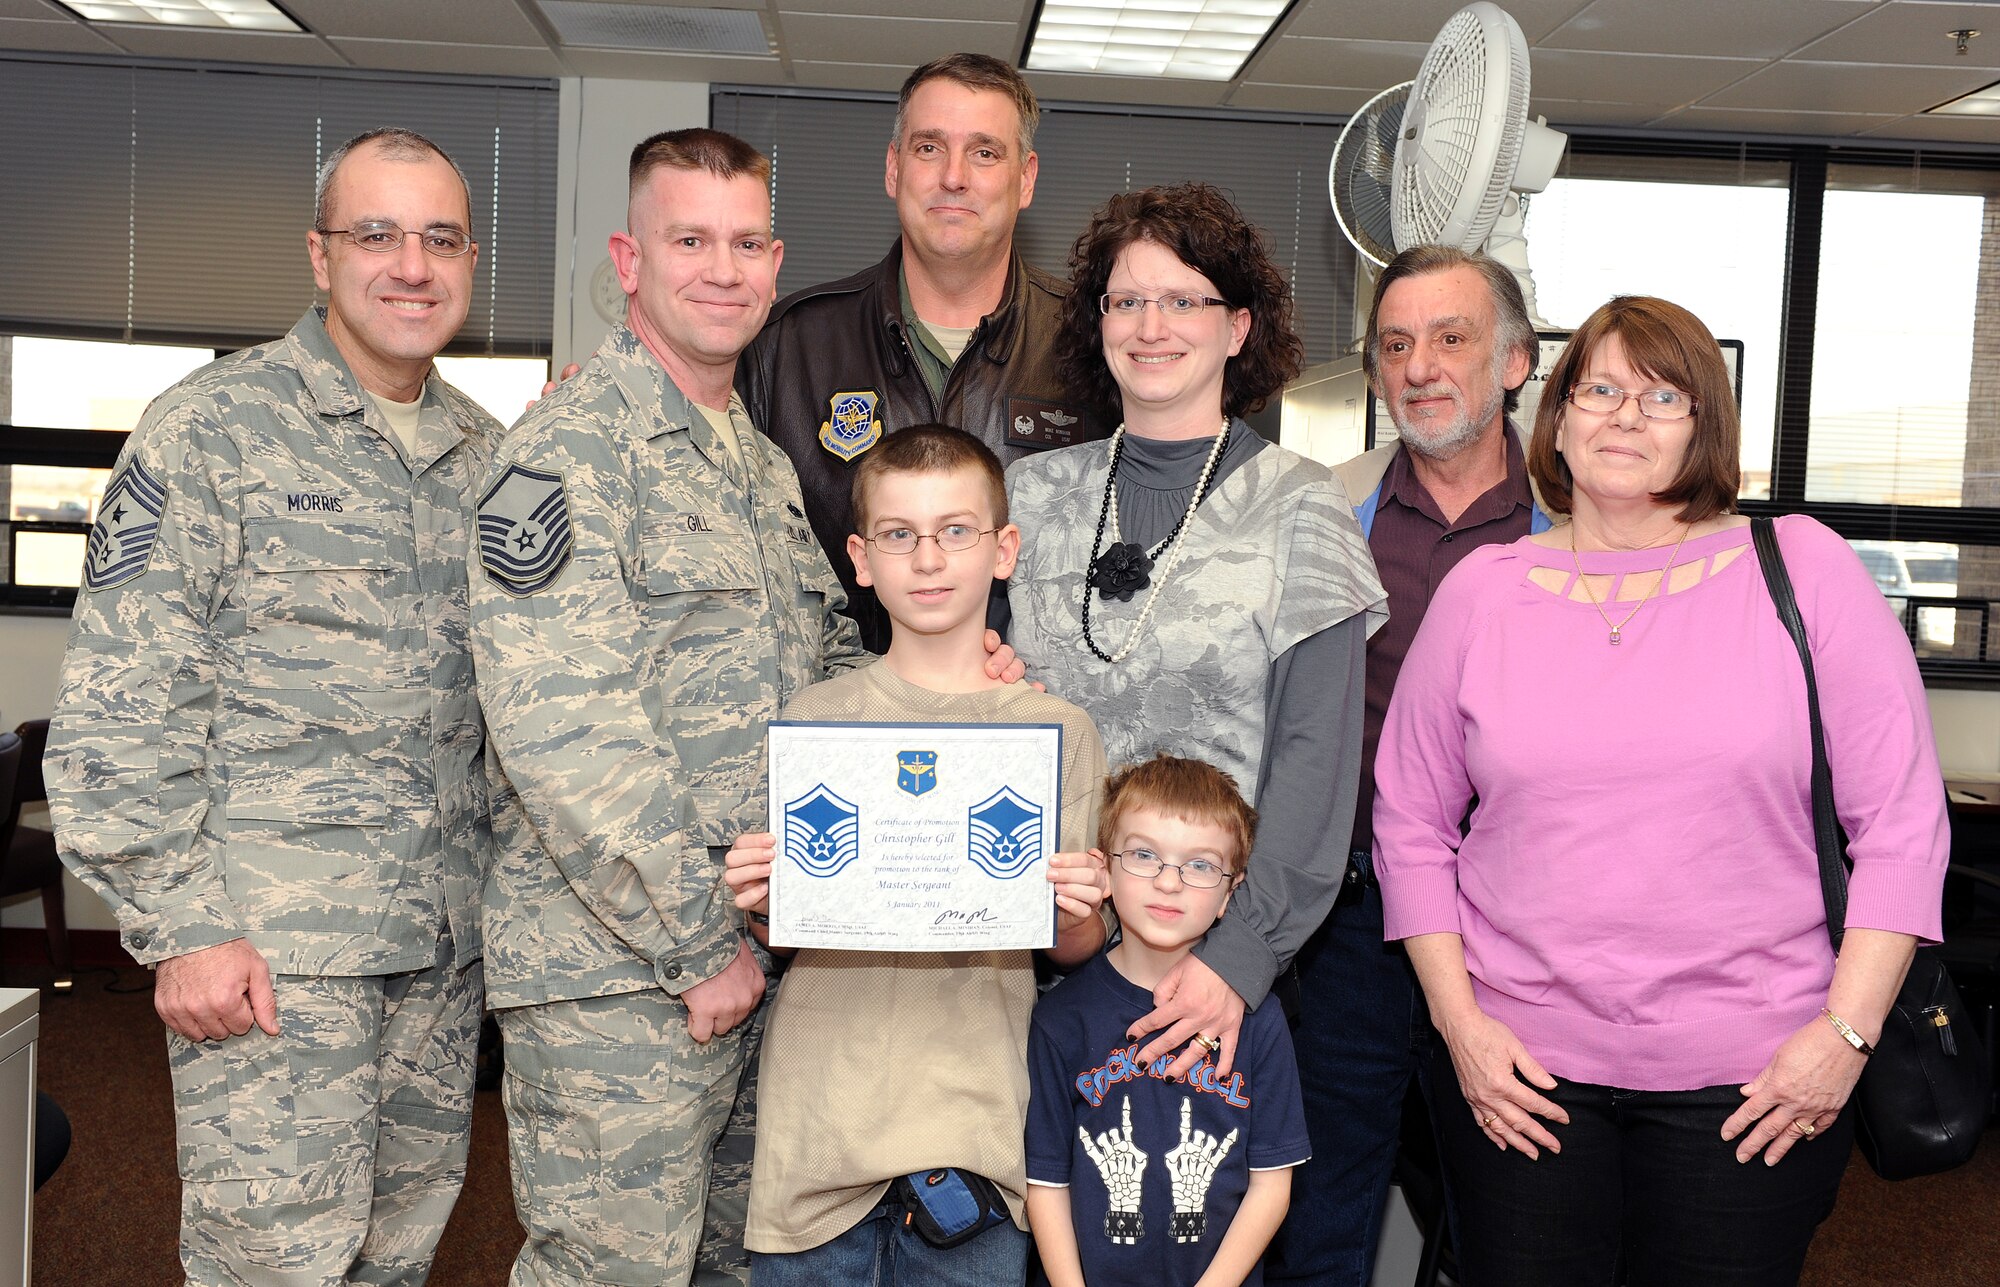 Tech. Sgt. Christopher Gill (second from left), 19th Airlift Wing Safety Office, poses with his family members and base leaders Jan. 5, 2011, at Little Rock Air Force Base, Ark. Sergeant Gill was promoted to master sergeant through the Stripes for Exceptional Performers program. (U.S. Air Force photo by Airman 1st Class Ellora Stewart)